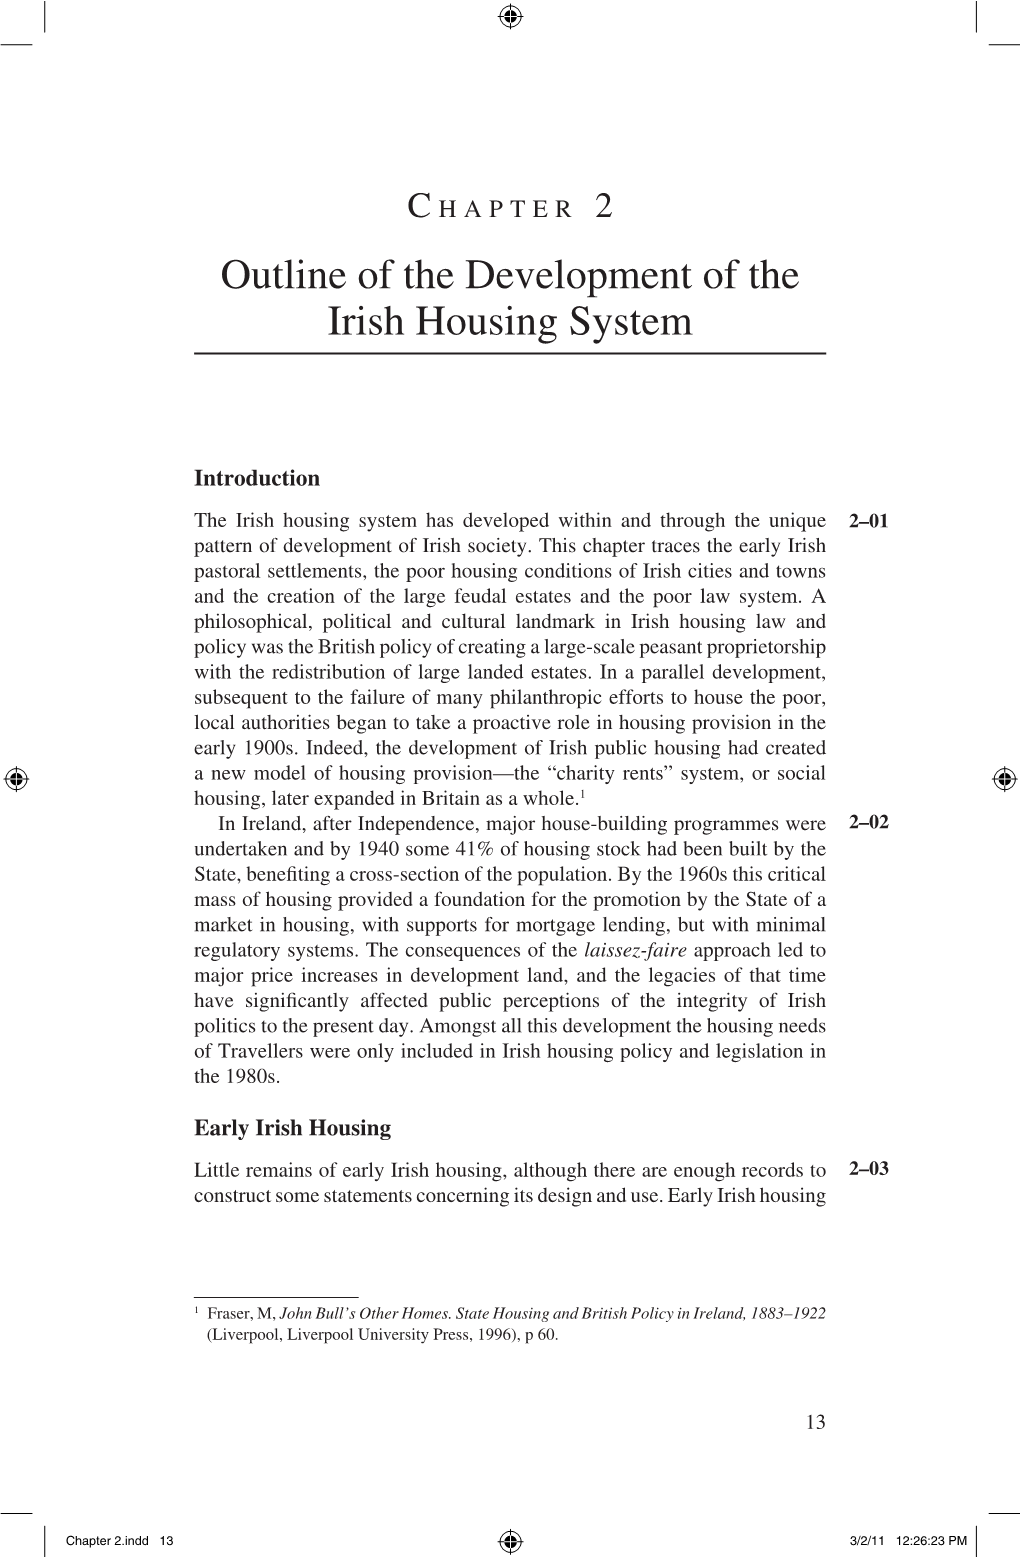 Outline of the Development of the Irish Housing System